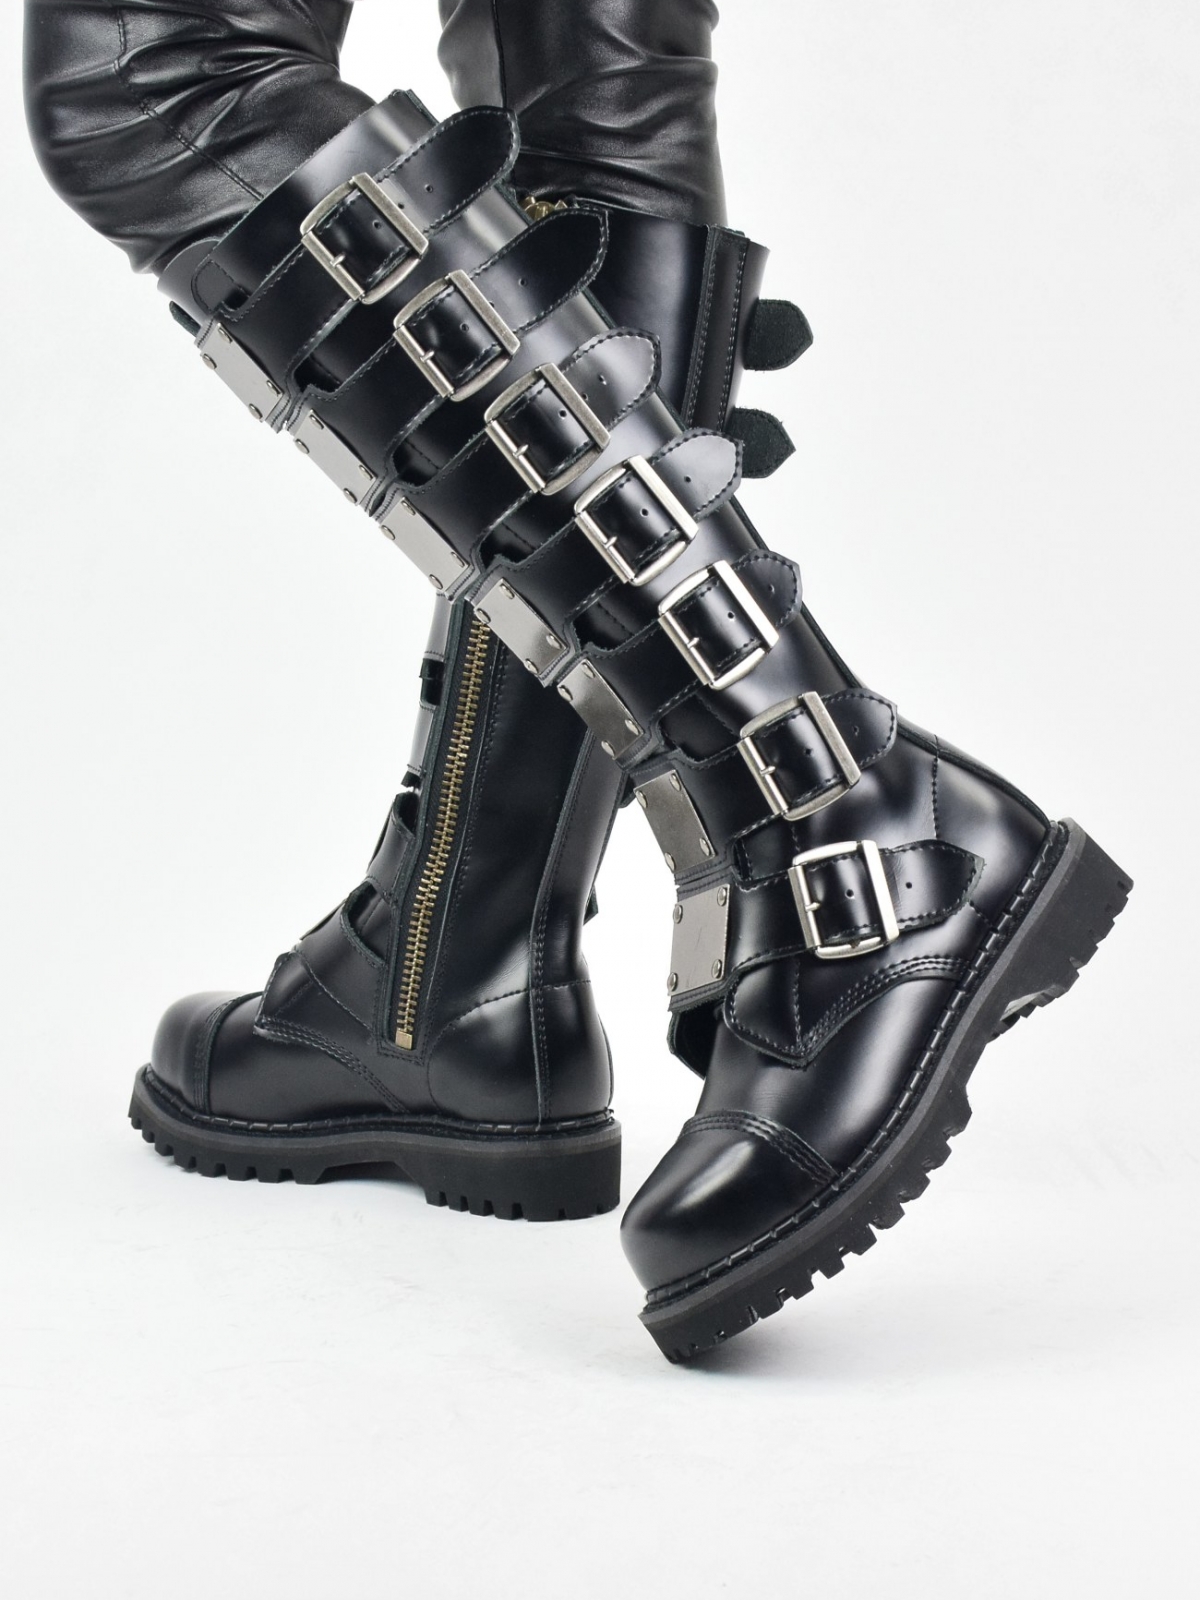 Alternative design unisex leather steel toe knee boots with multiple buckles & front metal plates in black